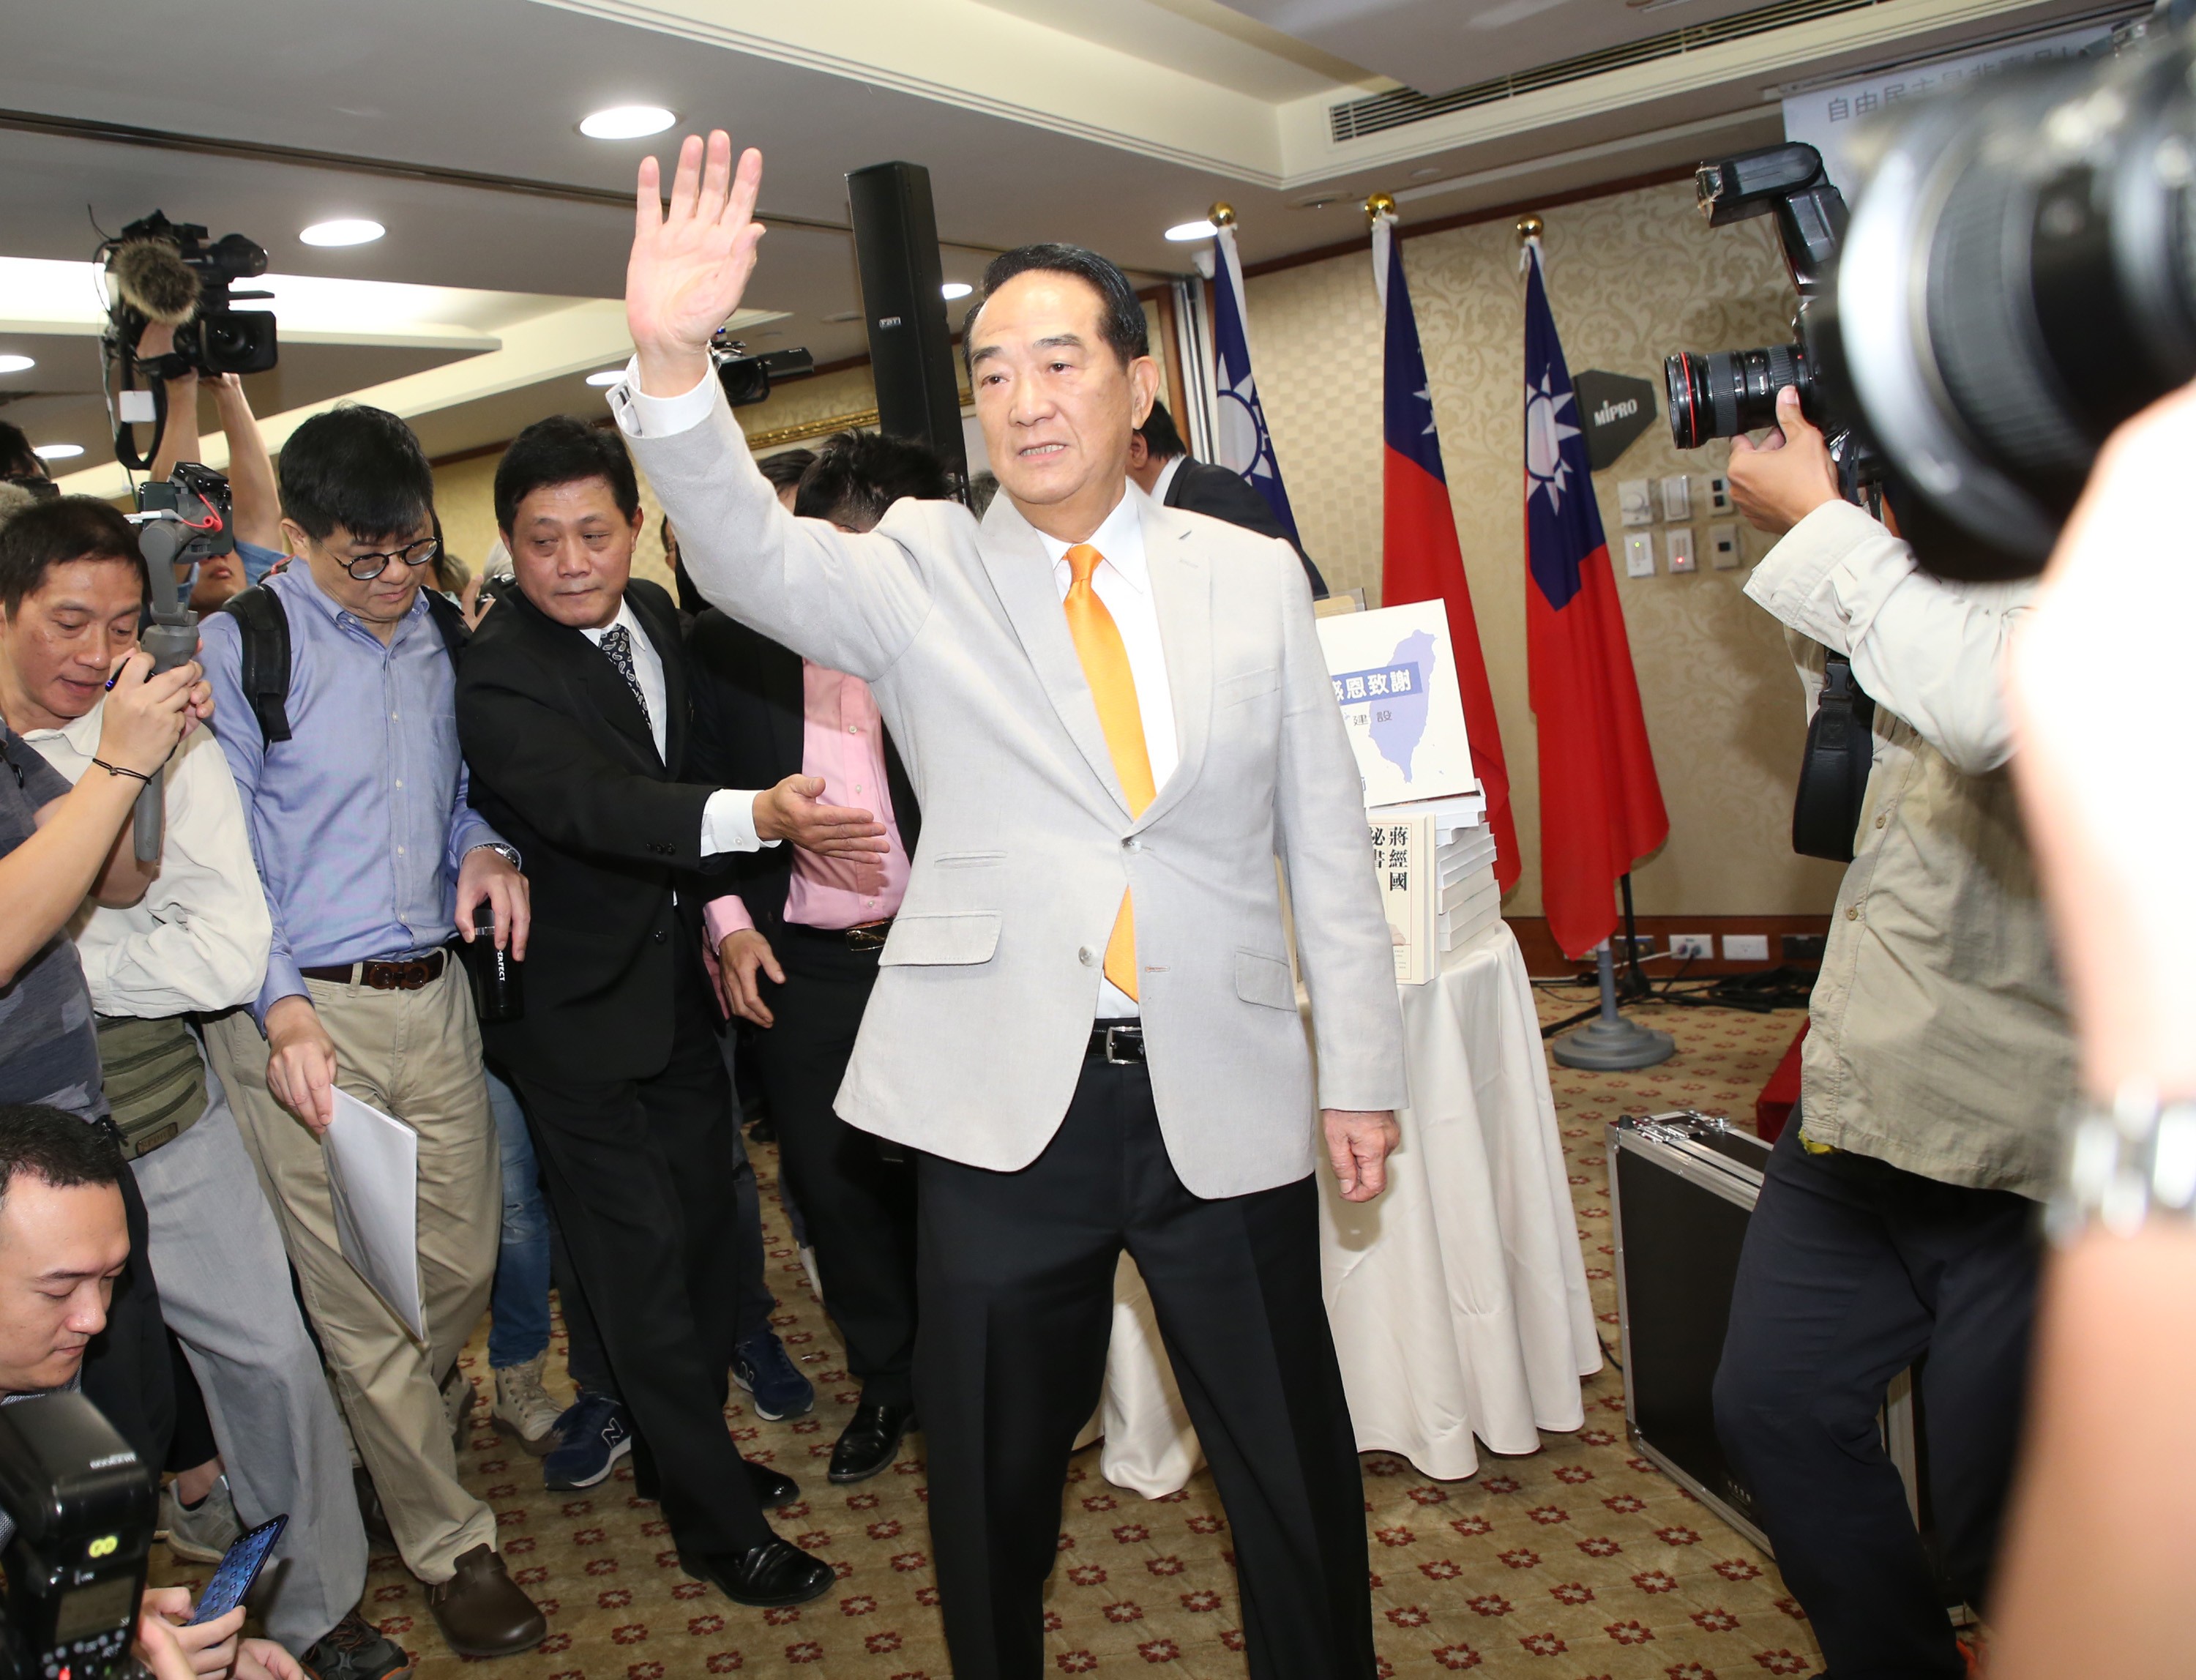 James Soong said this would be his fourth and final race for the presidency. Photo: Central News Agency